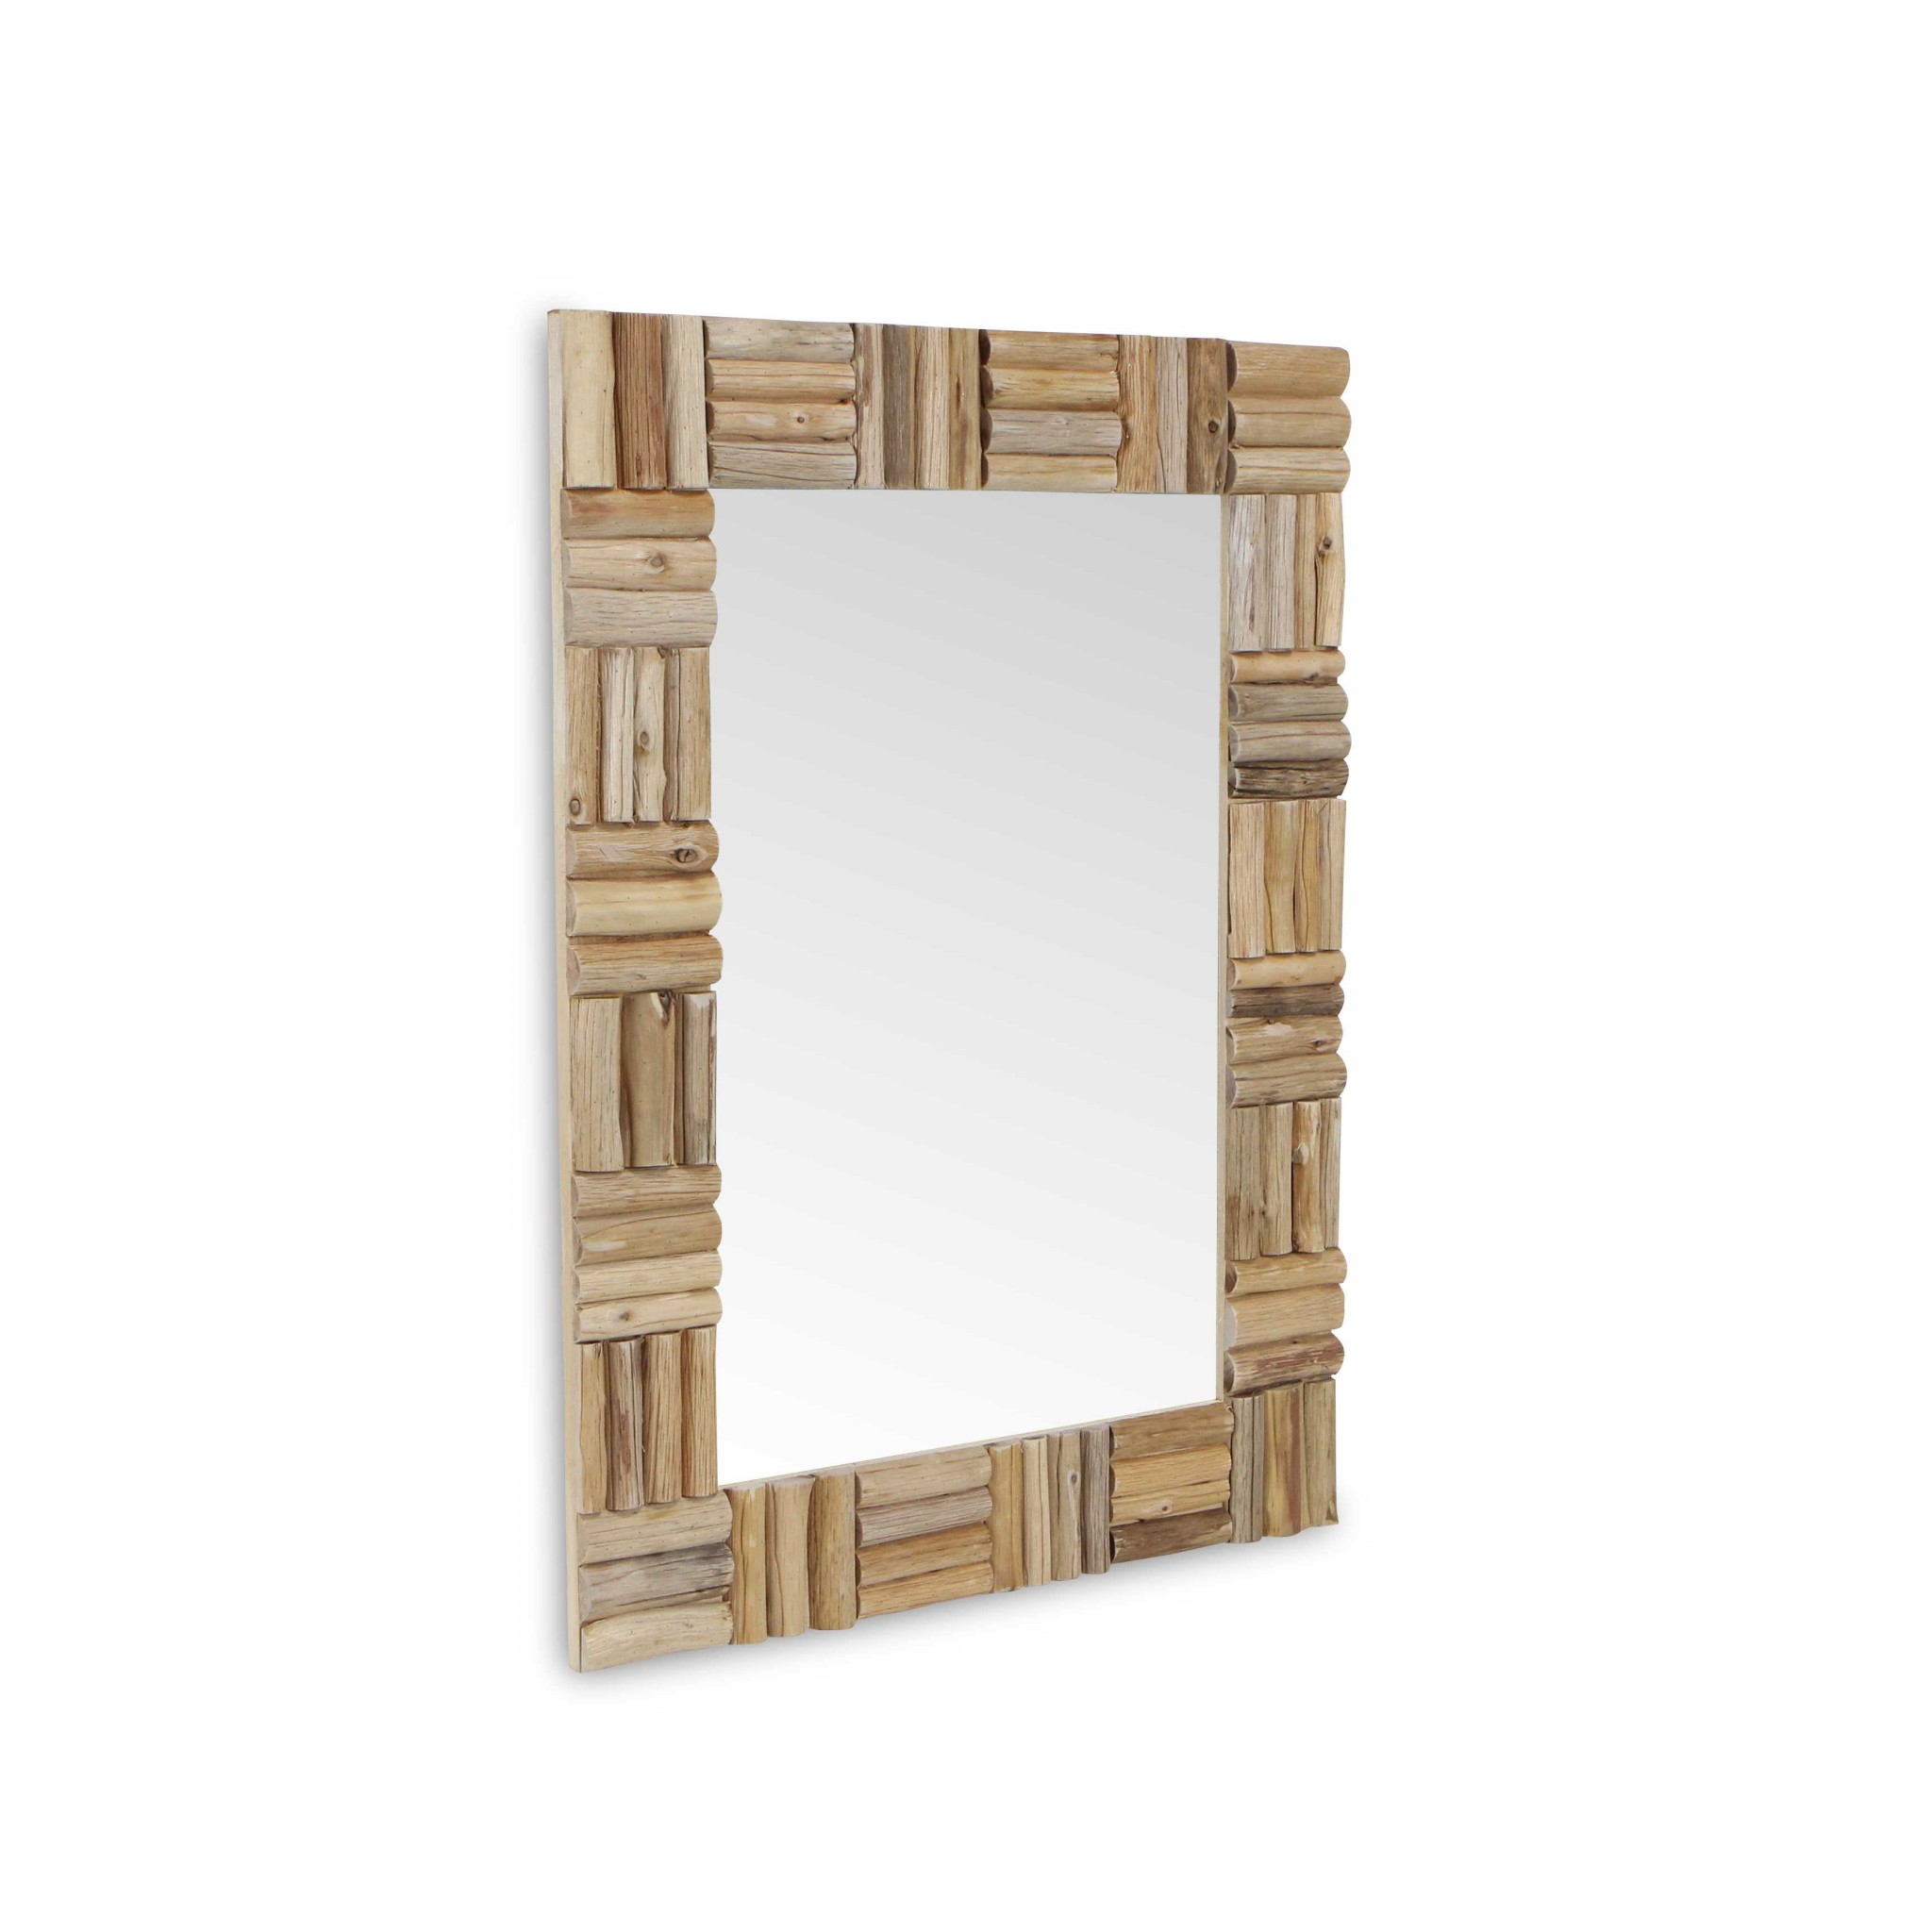 Natural Wood Finished Woven Design Frame Wall Mirror